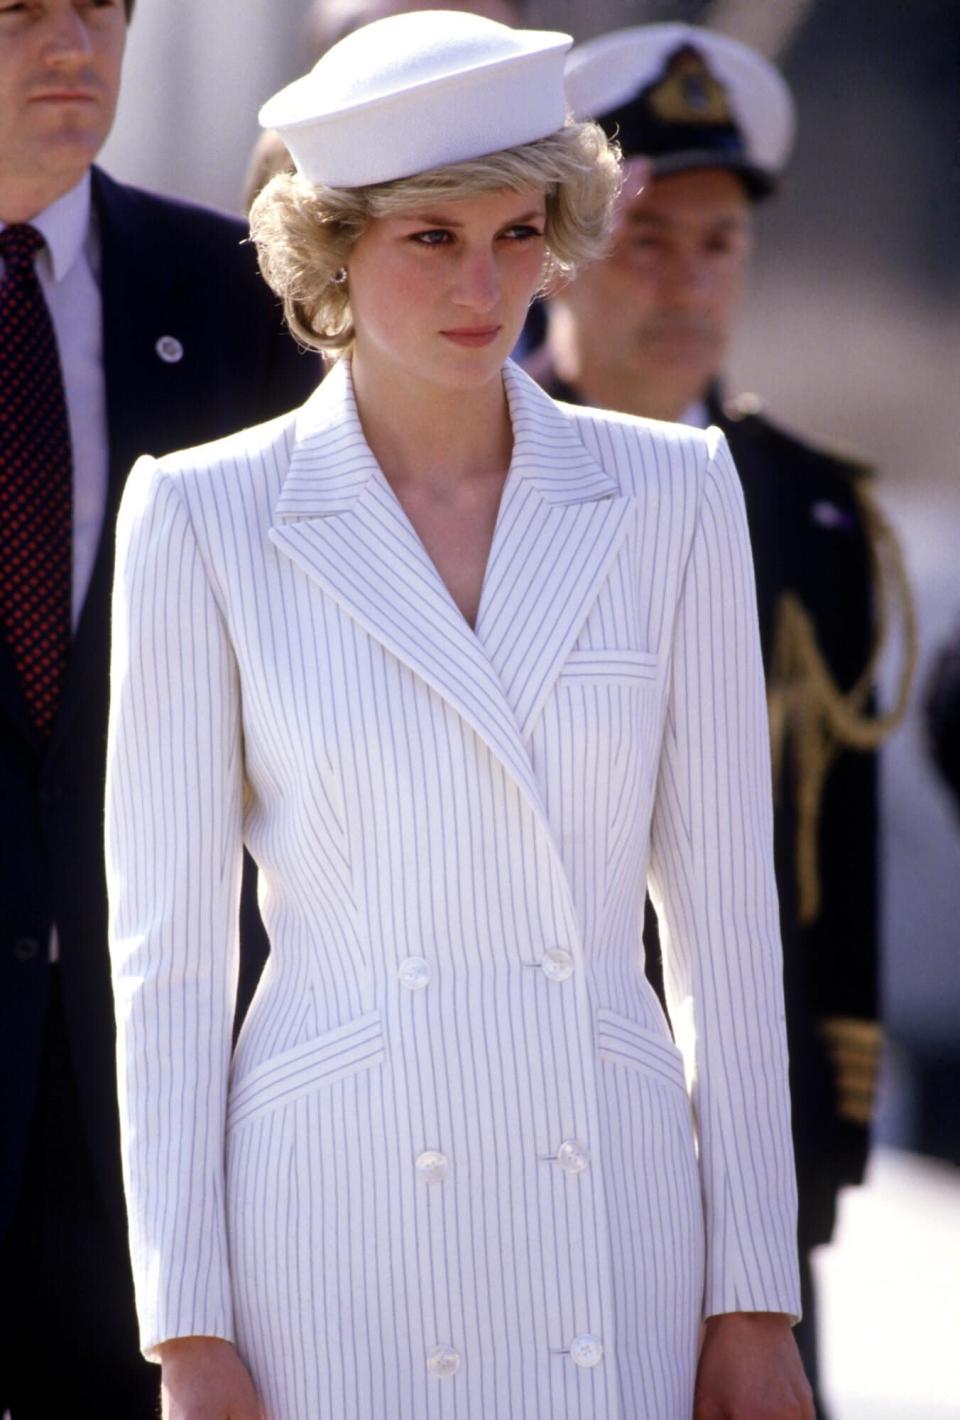 Diana Princess of Wales arrives at the naval base on April 20, 1985 in La Spezia, Italy